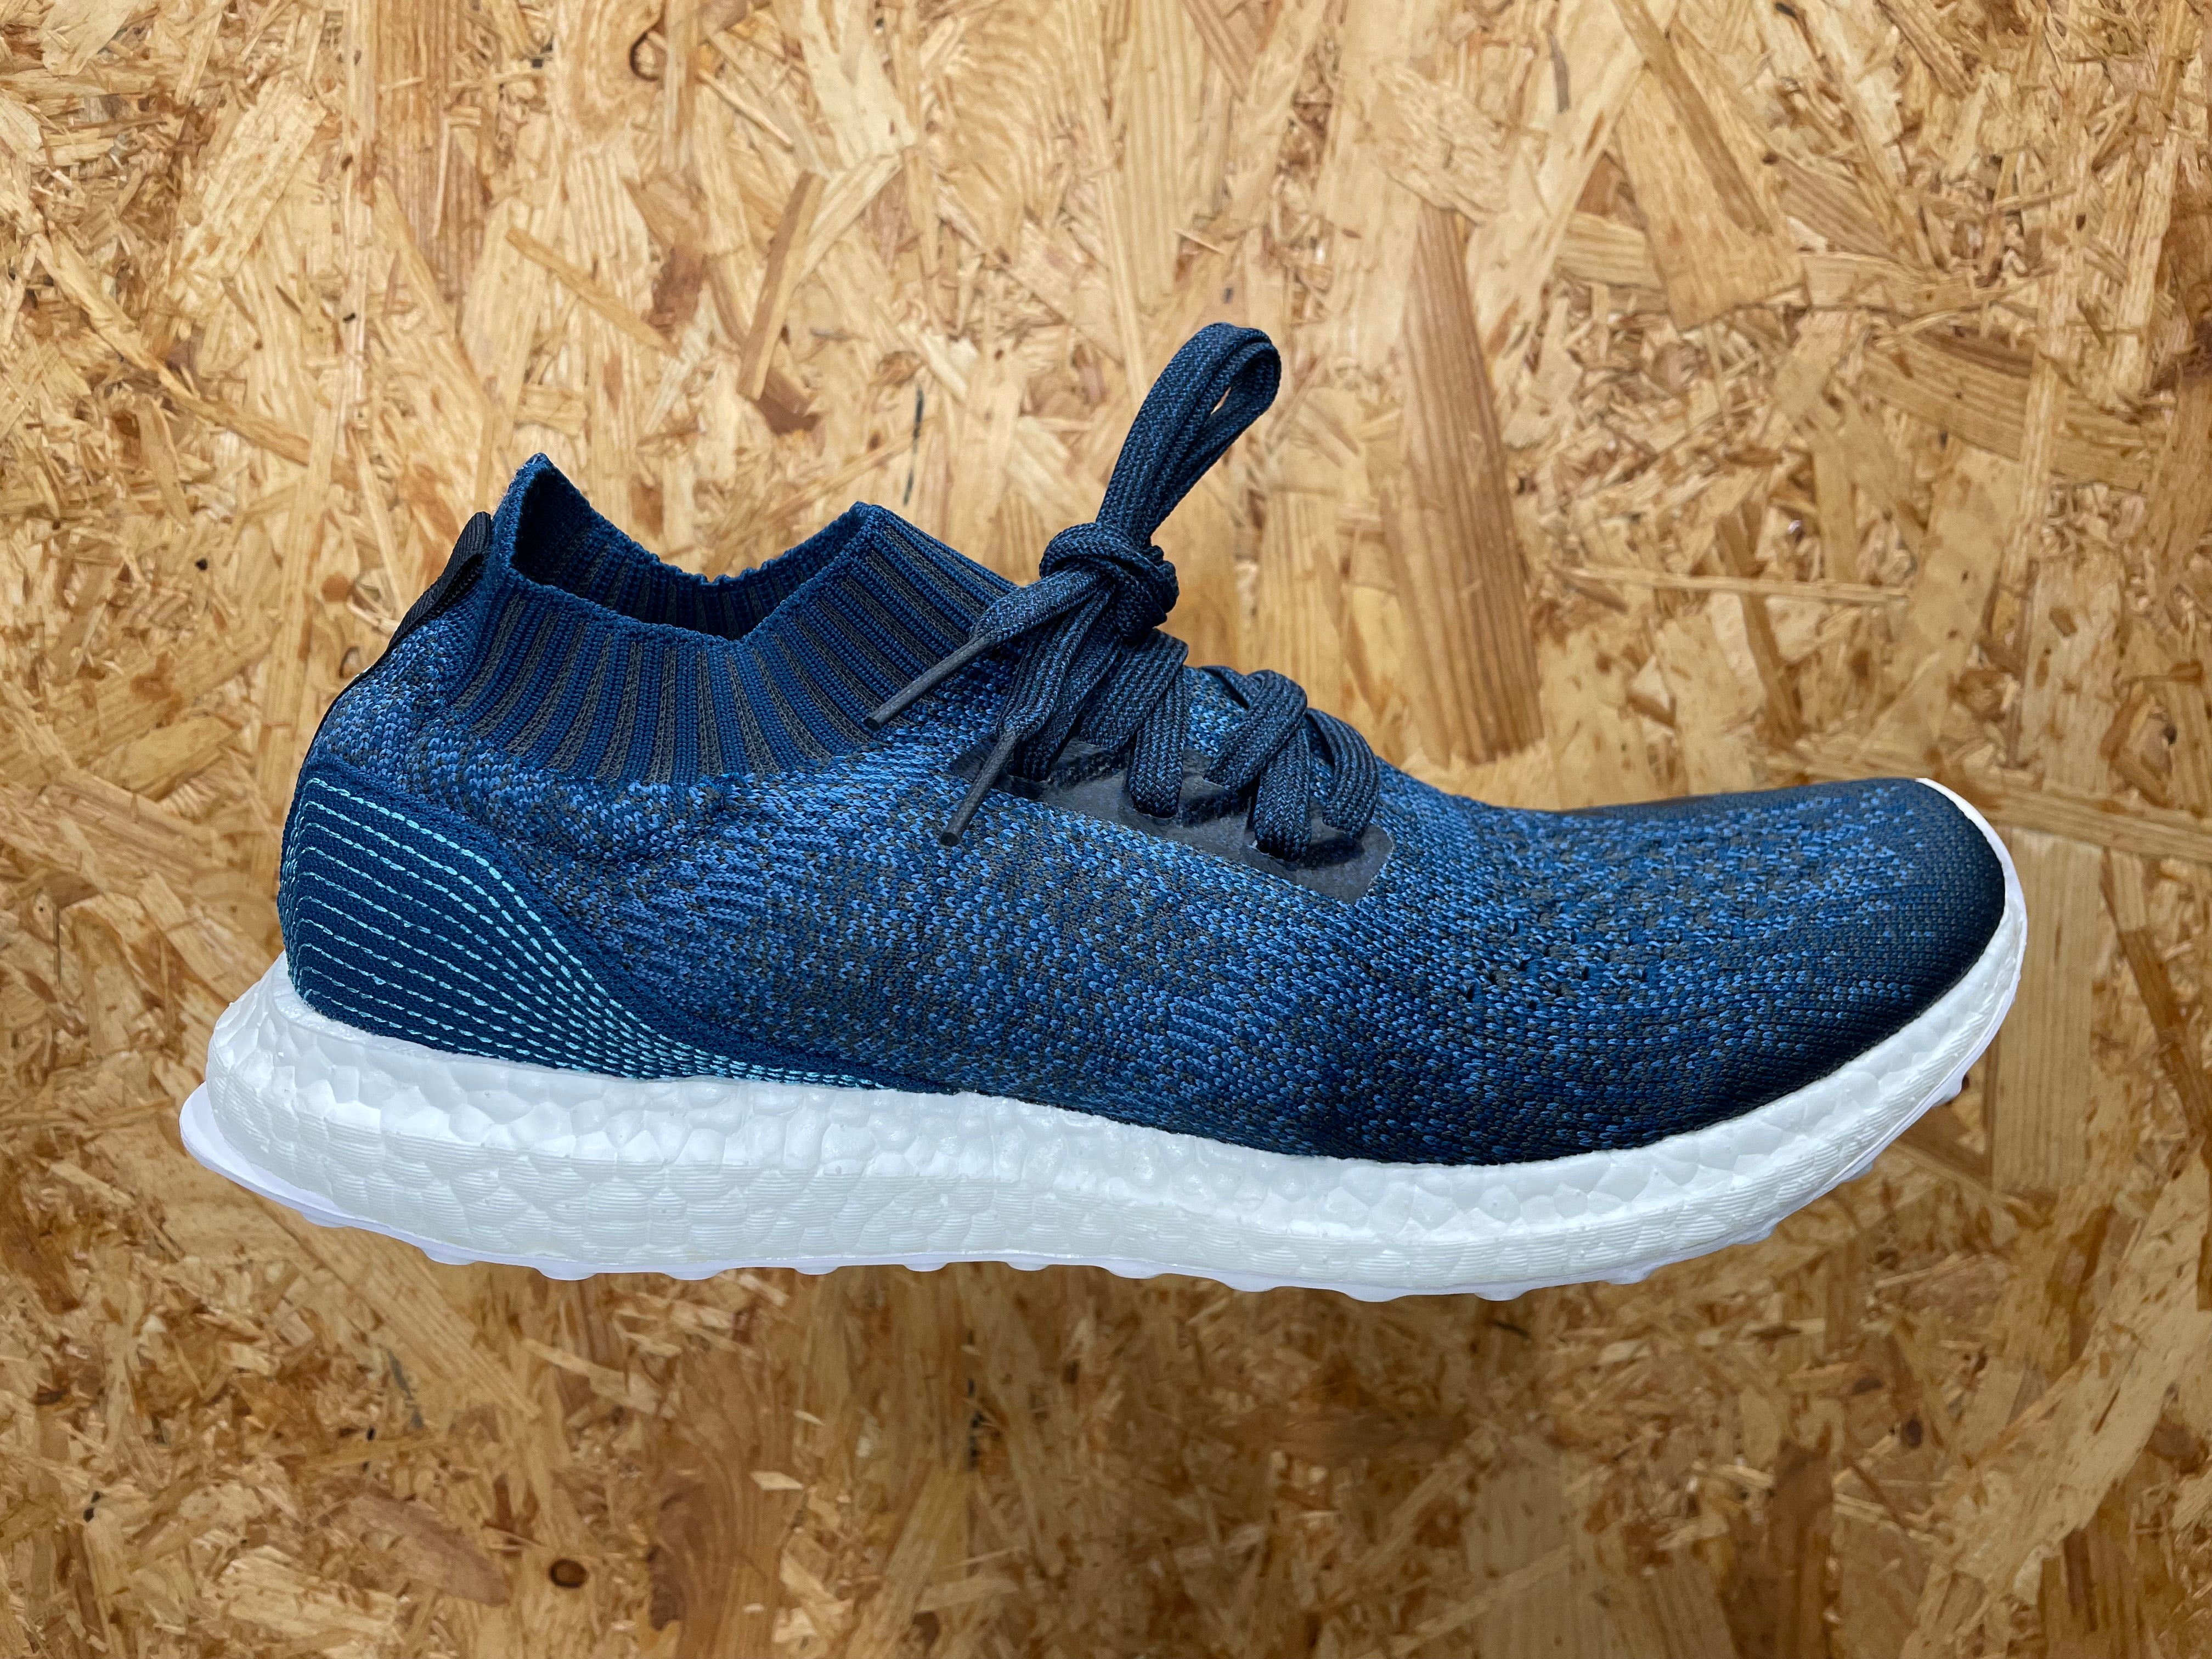 Ultra Boost Uncaged Parley Legend Blue – The Sneaker Store